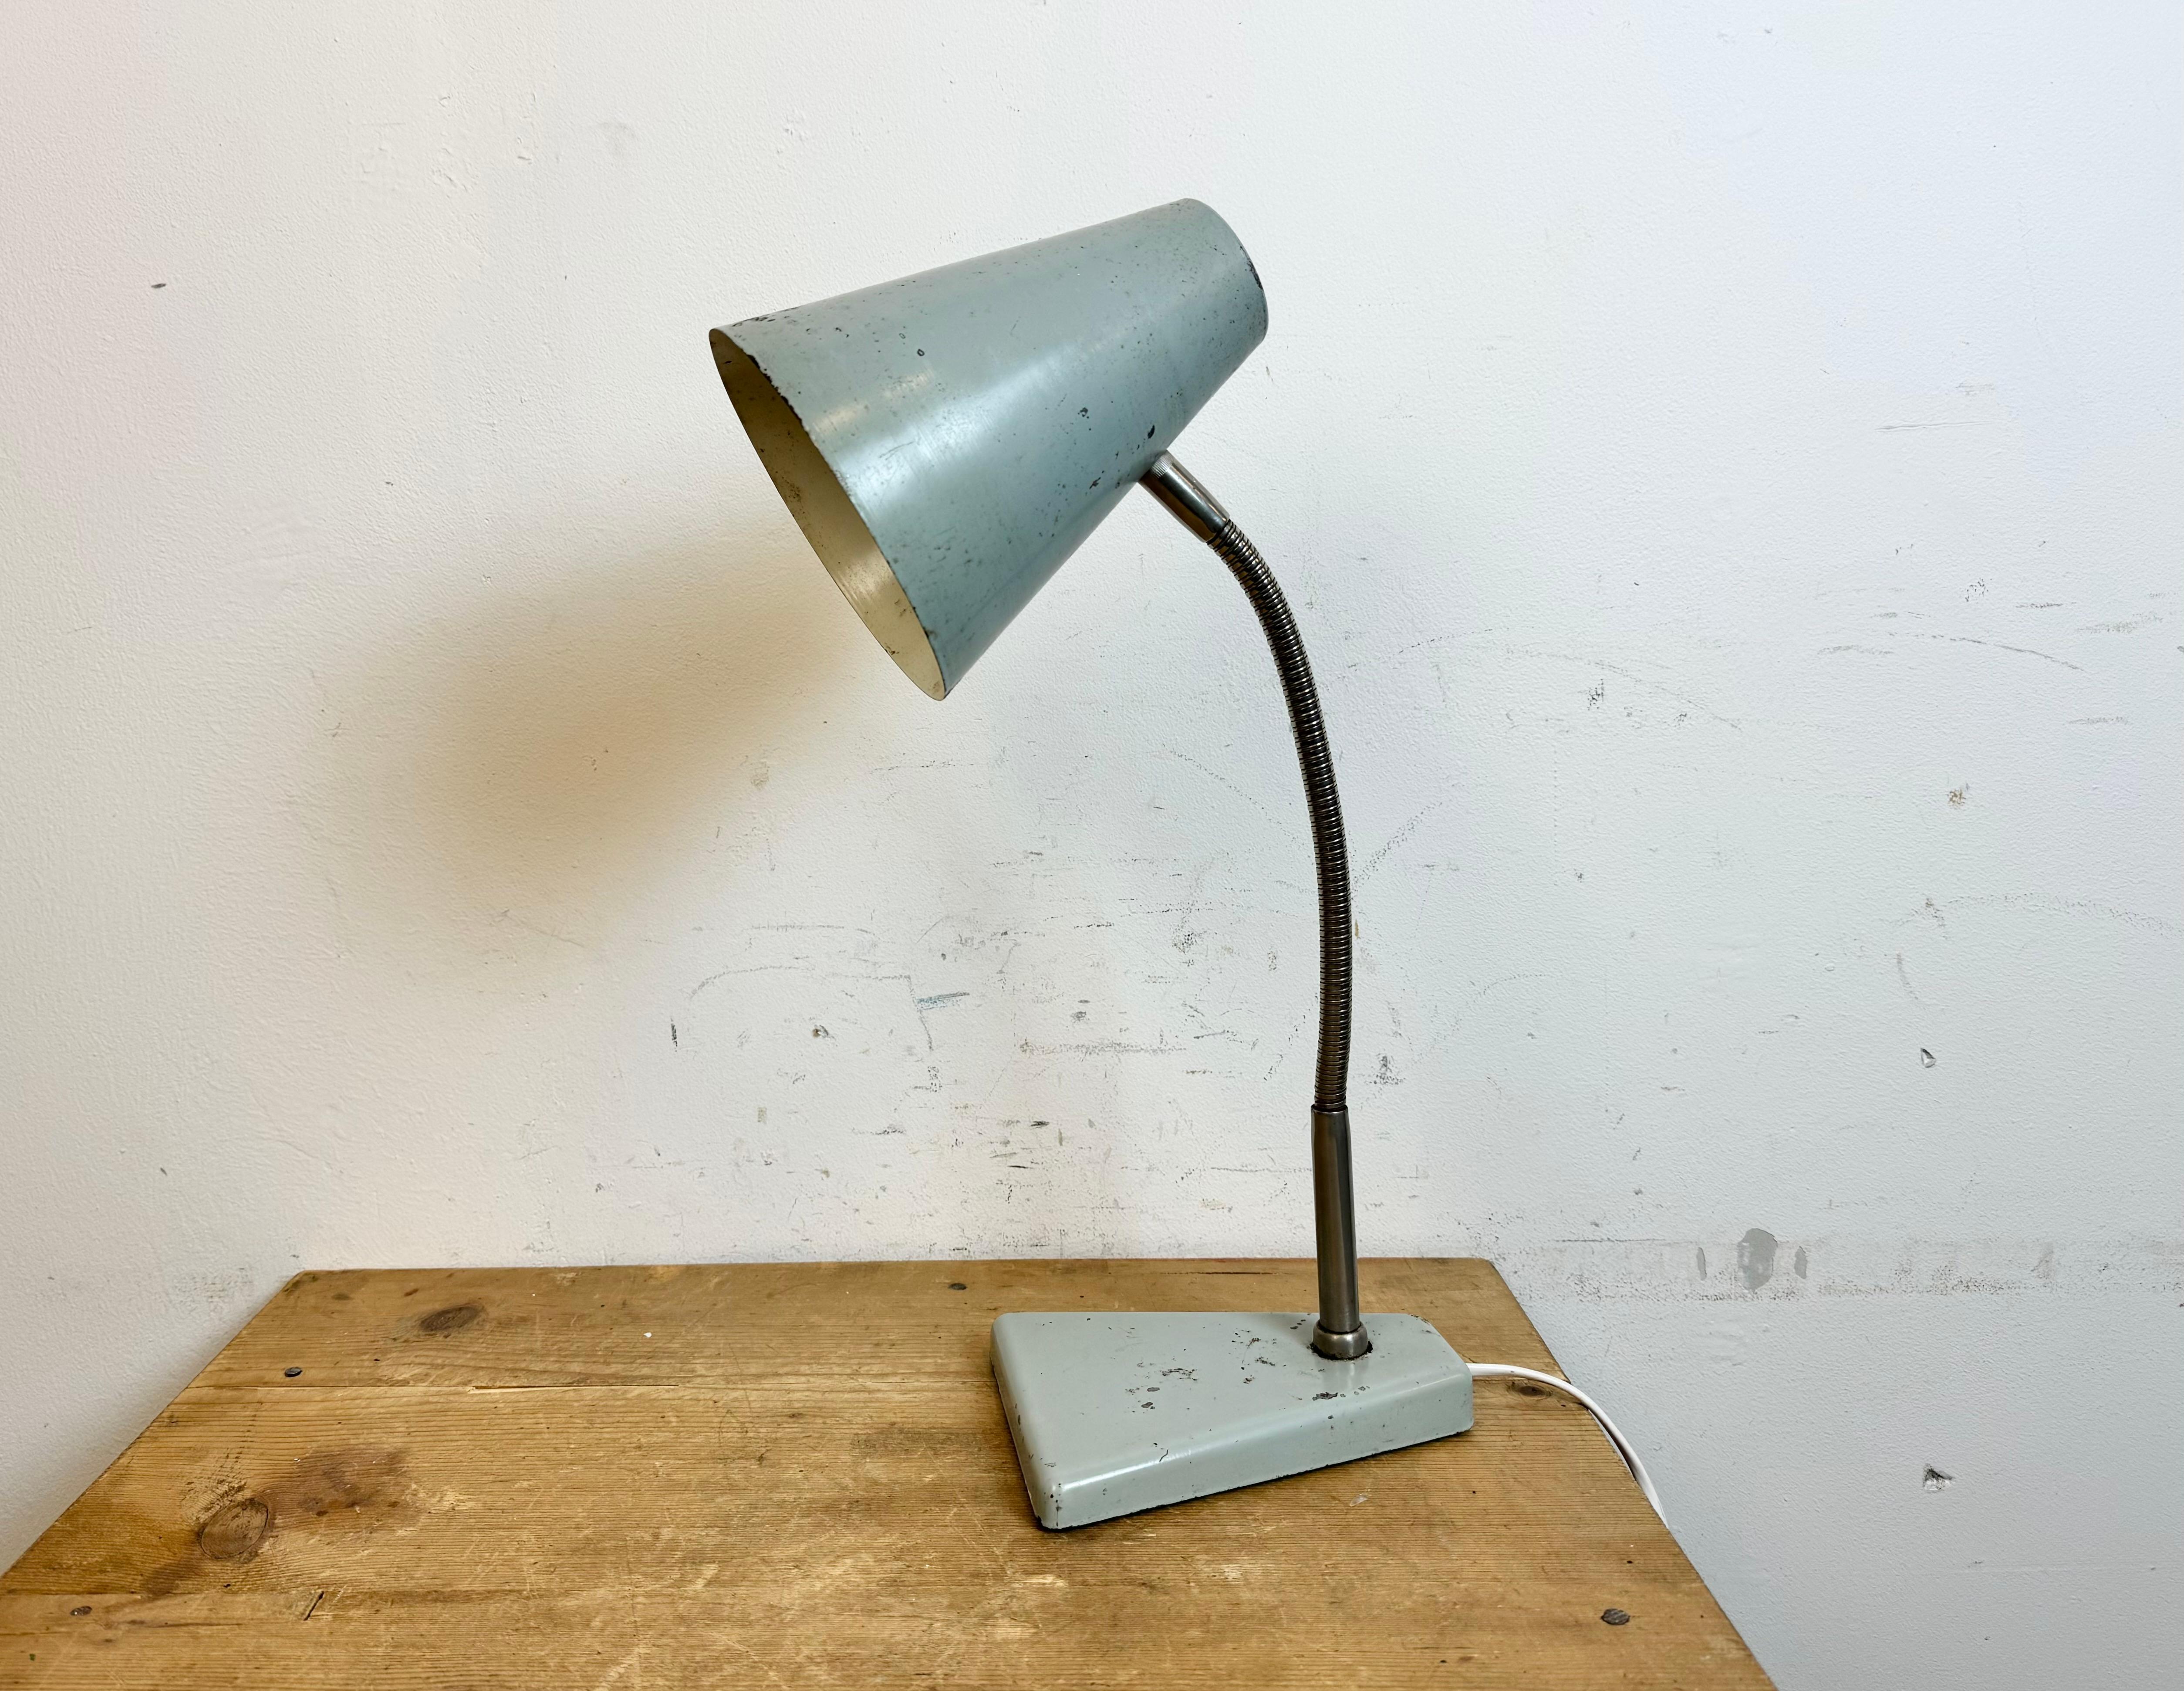 Industrial workshop table lamp made by Zaos in Poland during the 1960s.It features a grey metal base and shade and a  chrome plated gooseneck. The original socket requires E27/E26 lightbulbs.
The diameter of the shade is 15 cm. The weight of the